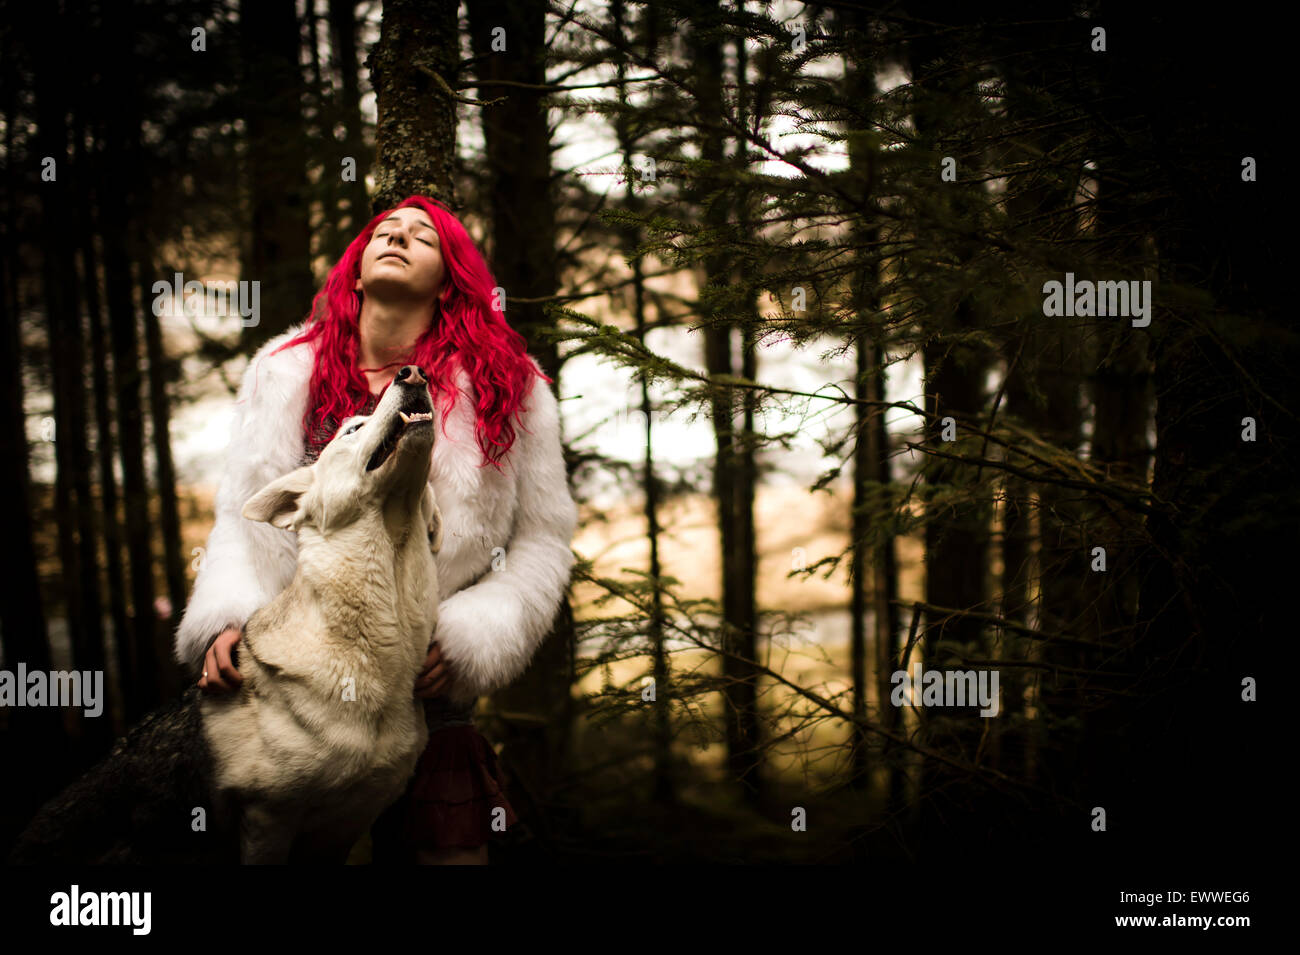 The stuff of dreams and nightmares: A young red haired caucasian woman girl alone in a dark pine forest with a white wolf-like dog Stock Photo